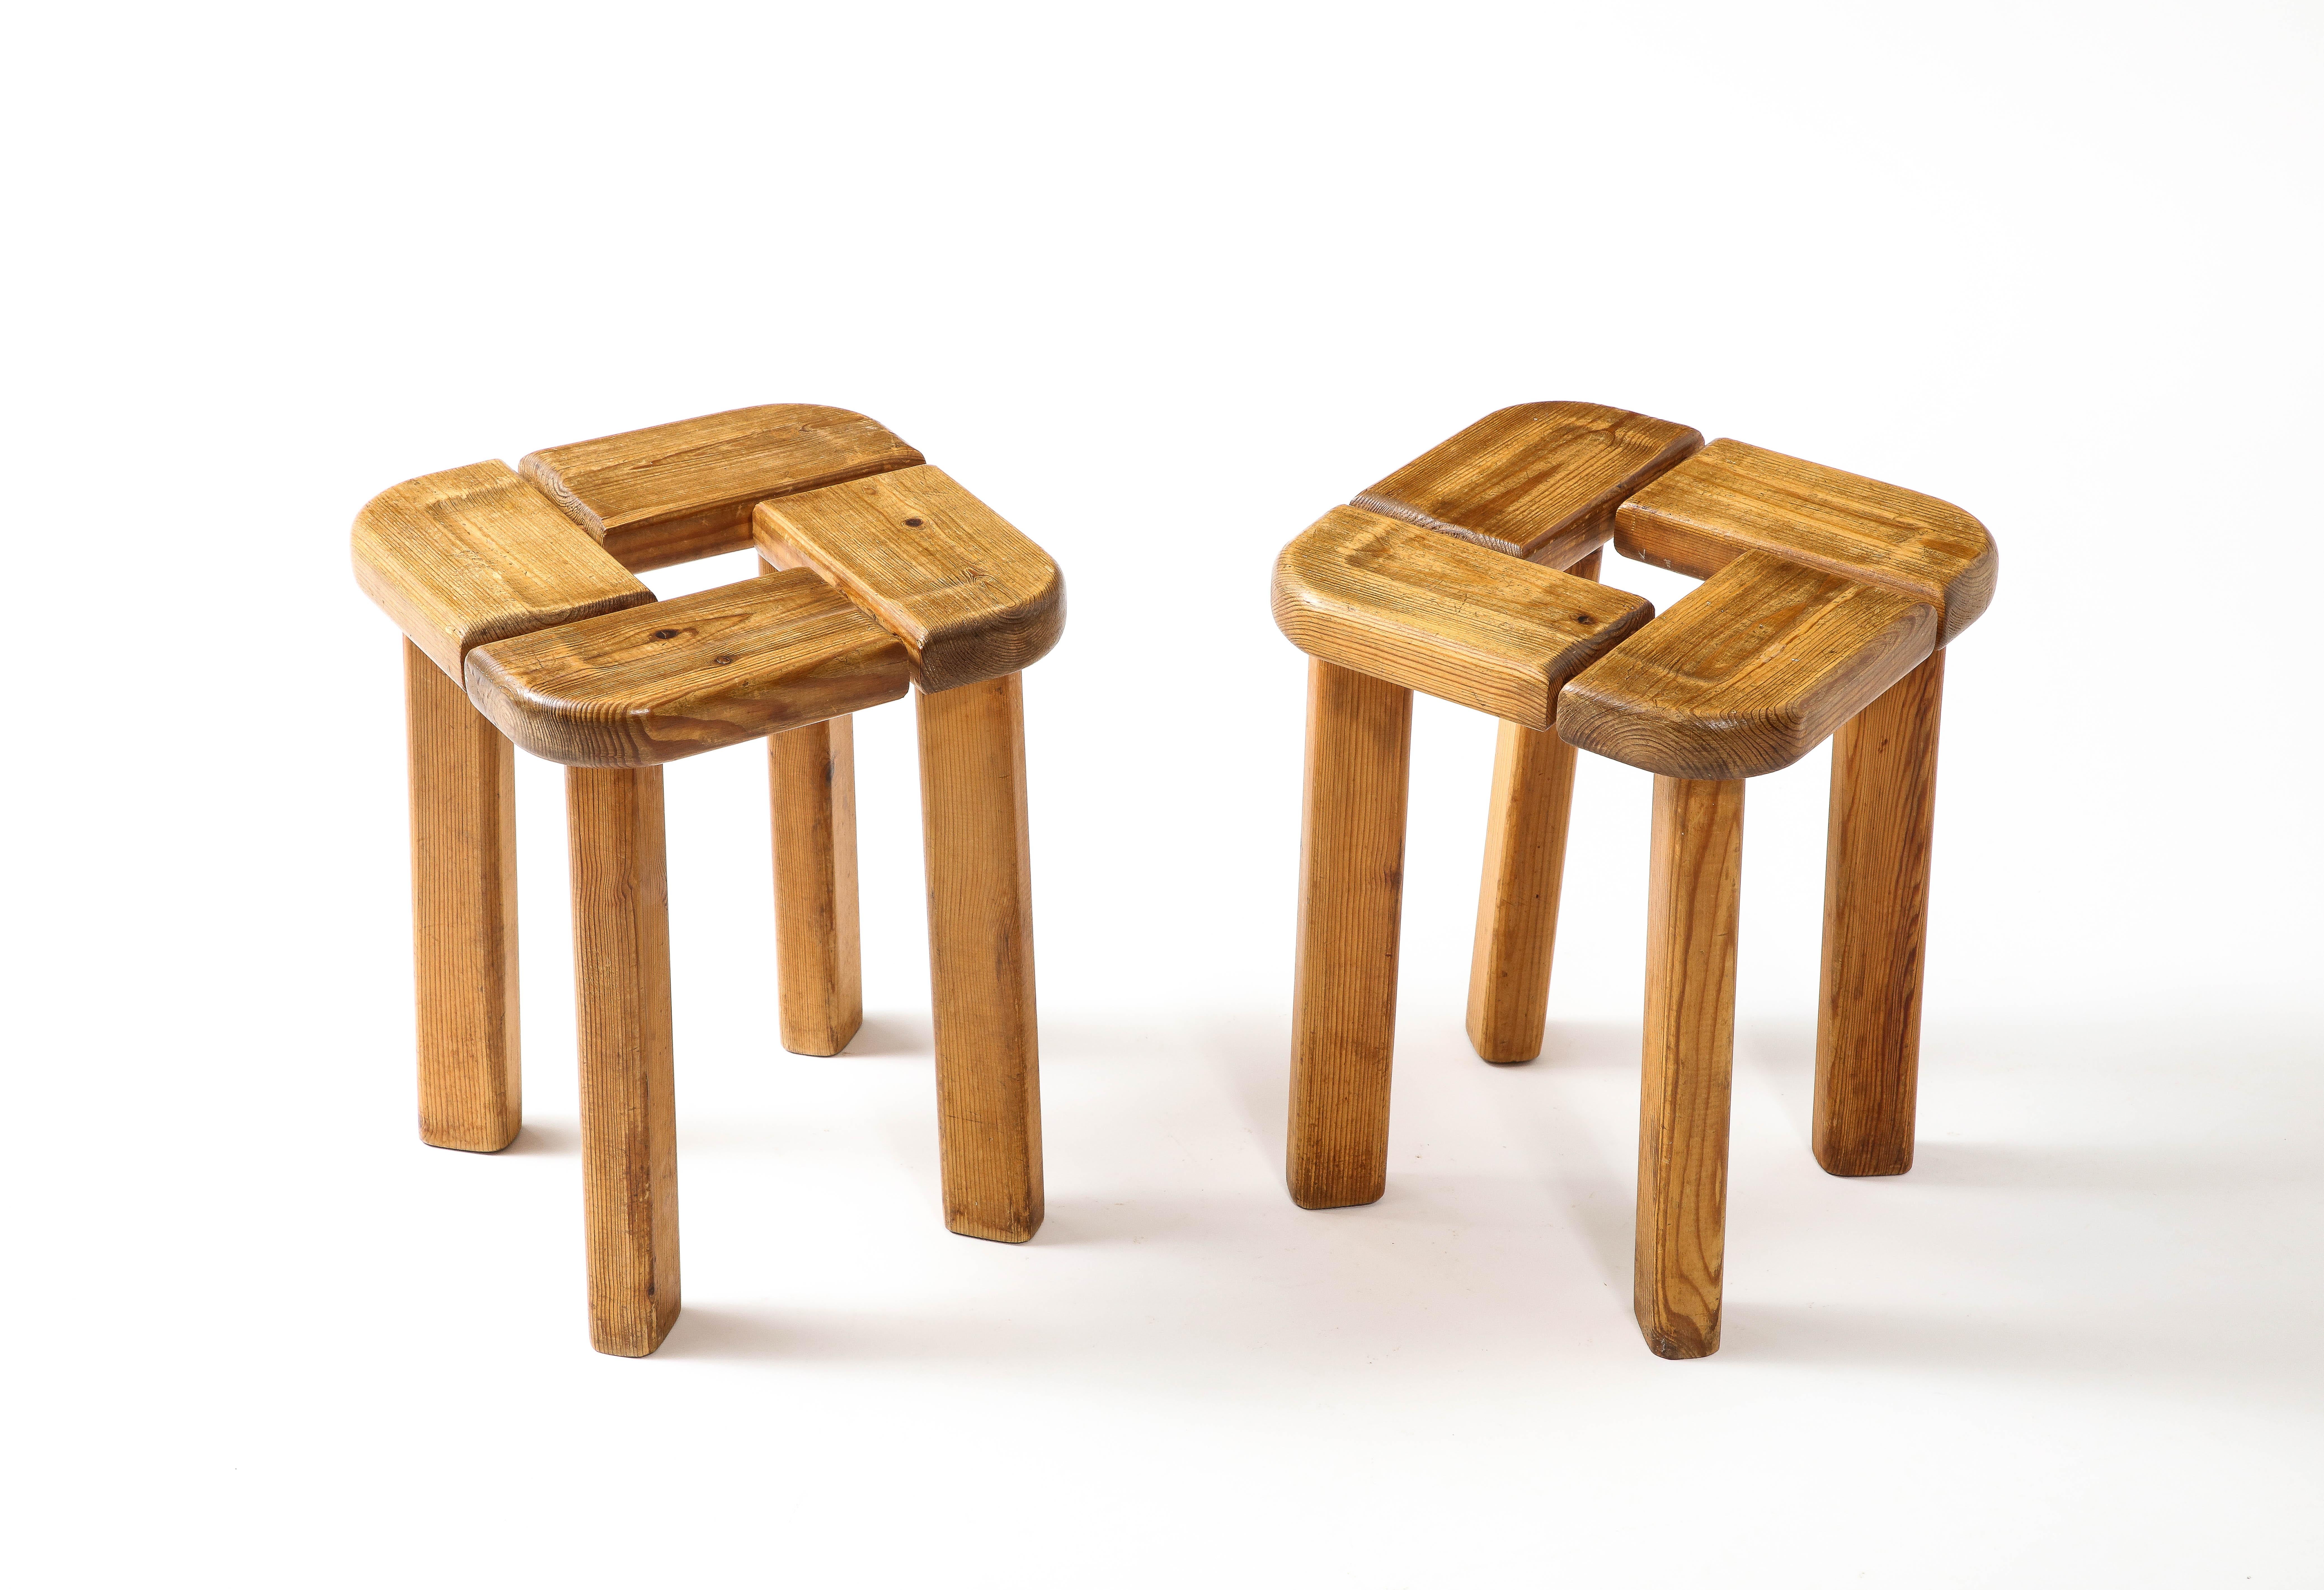 Hand-Carved Pine Stools by Olof Ottelin, Sweden 1960s For Sale